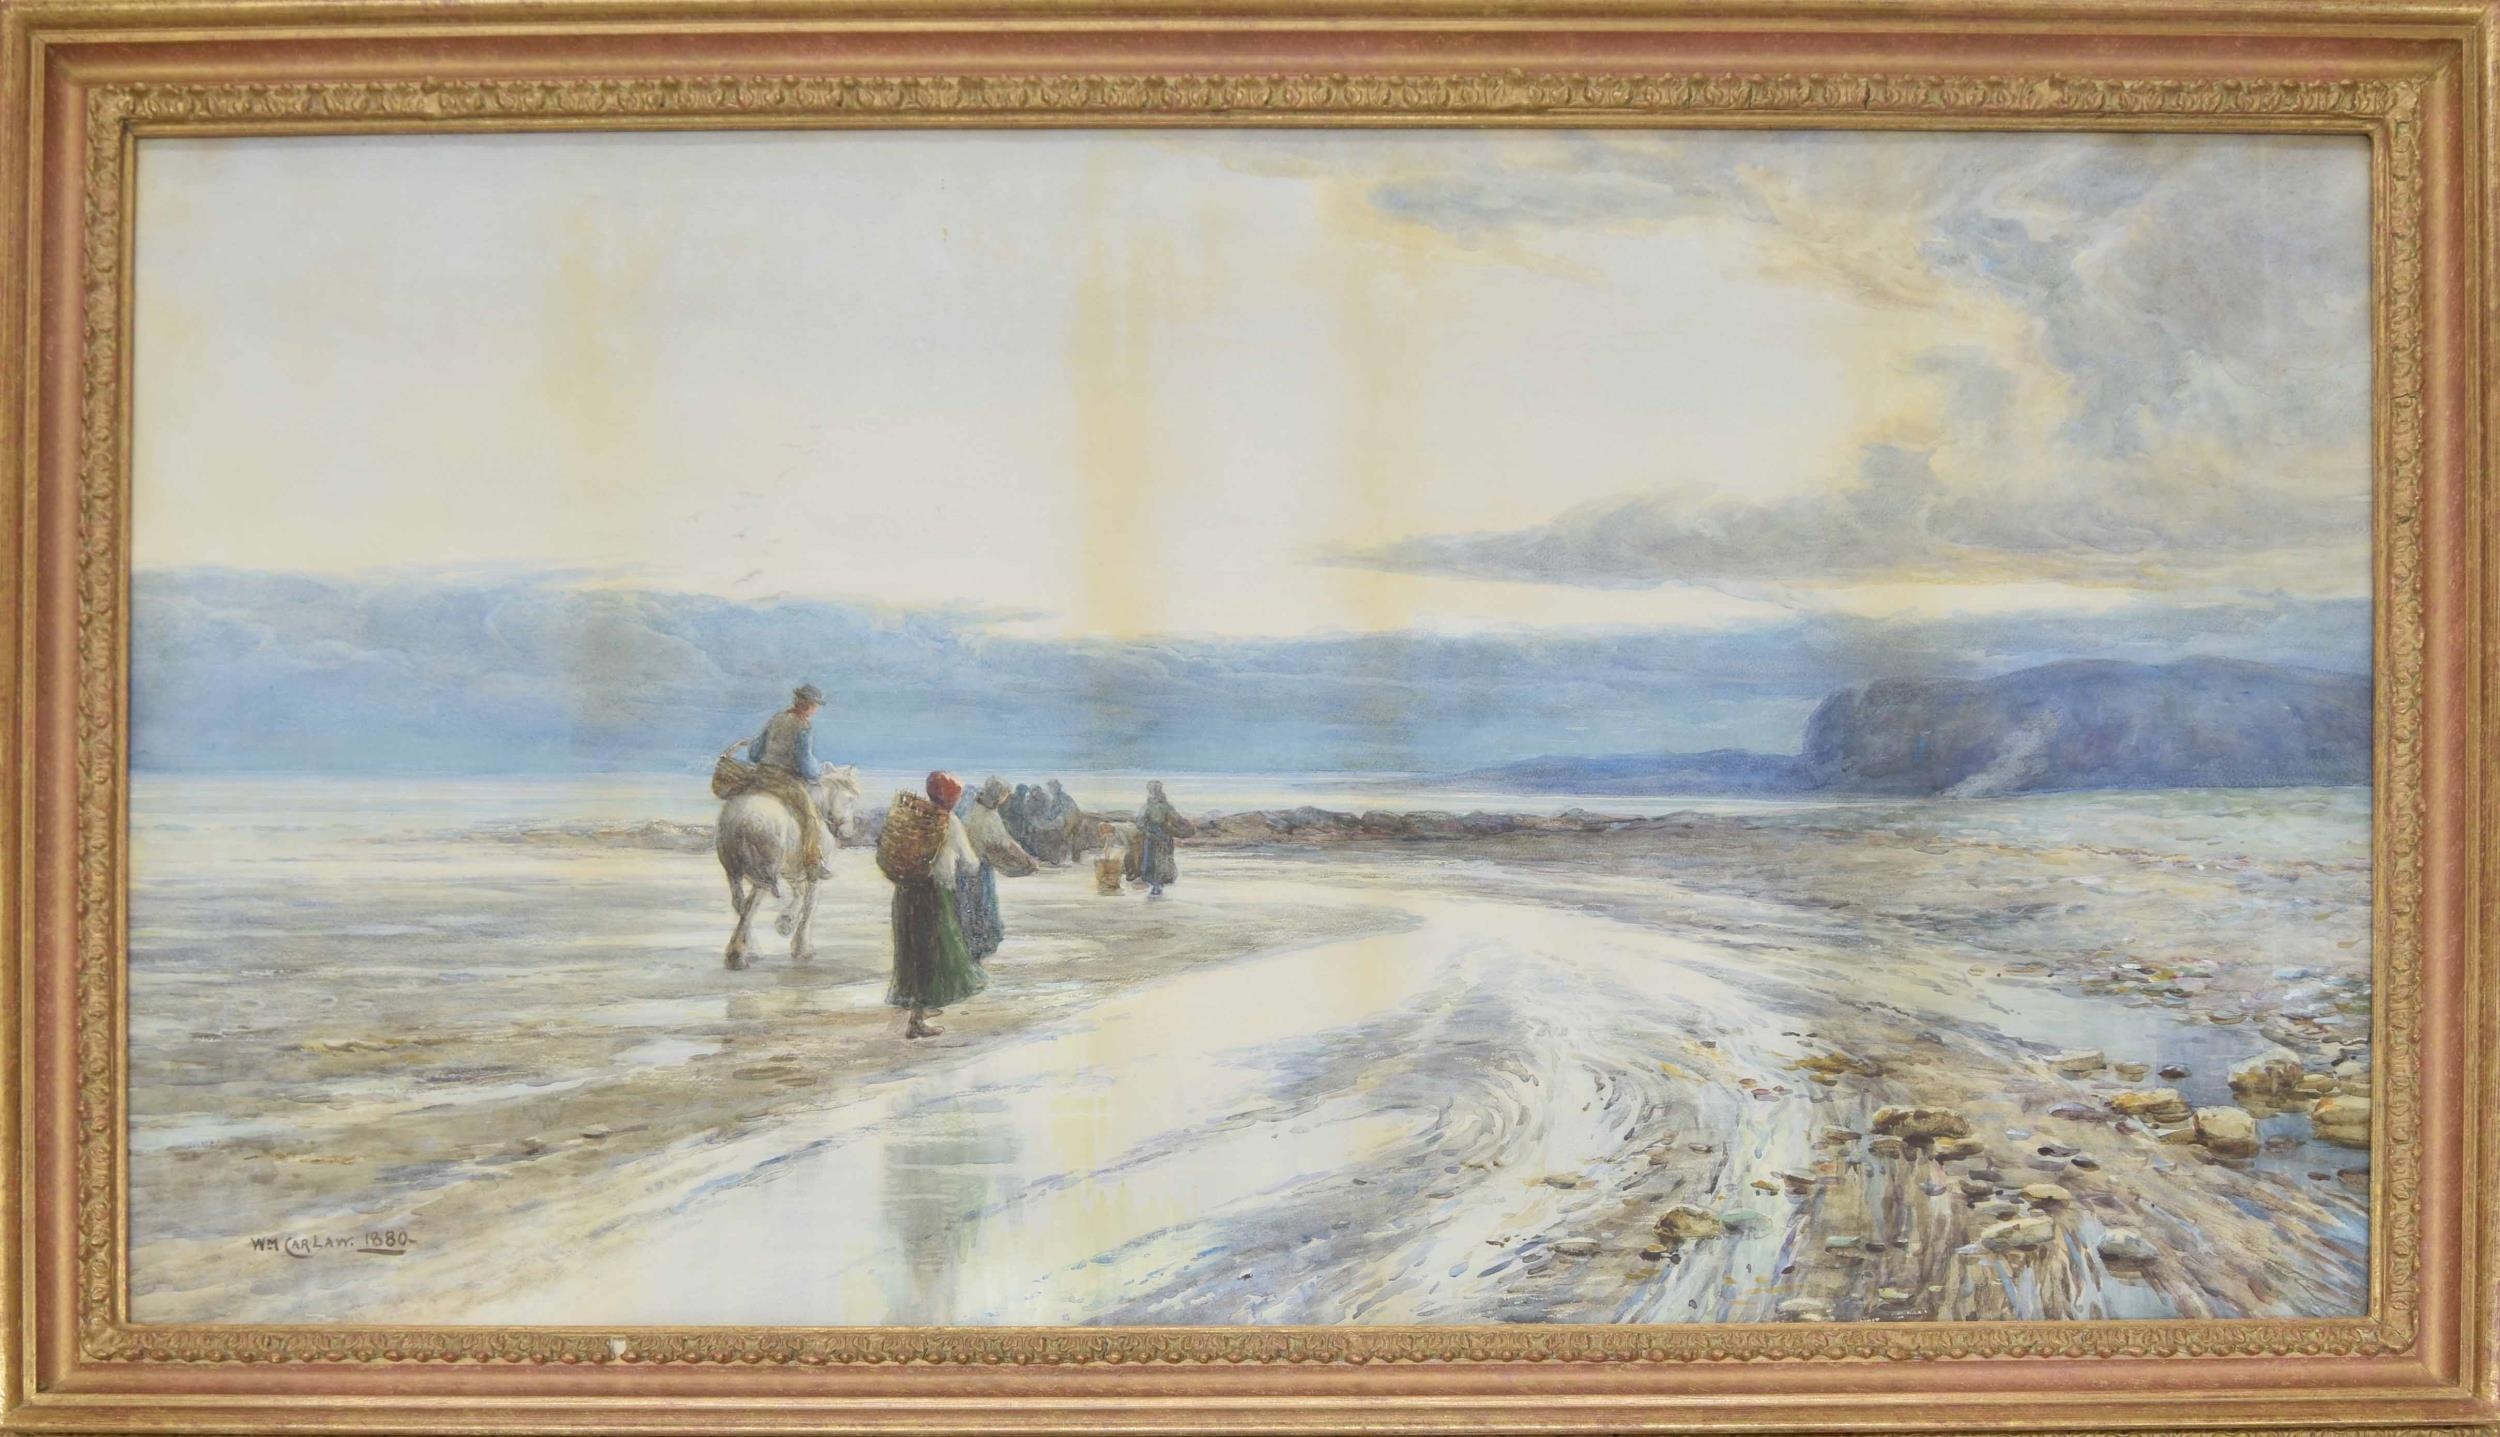 William Carlaw RSW., (1847-1889) - "Day that glides by amidst unfinished toil", beach scene at low